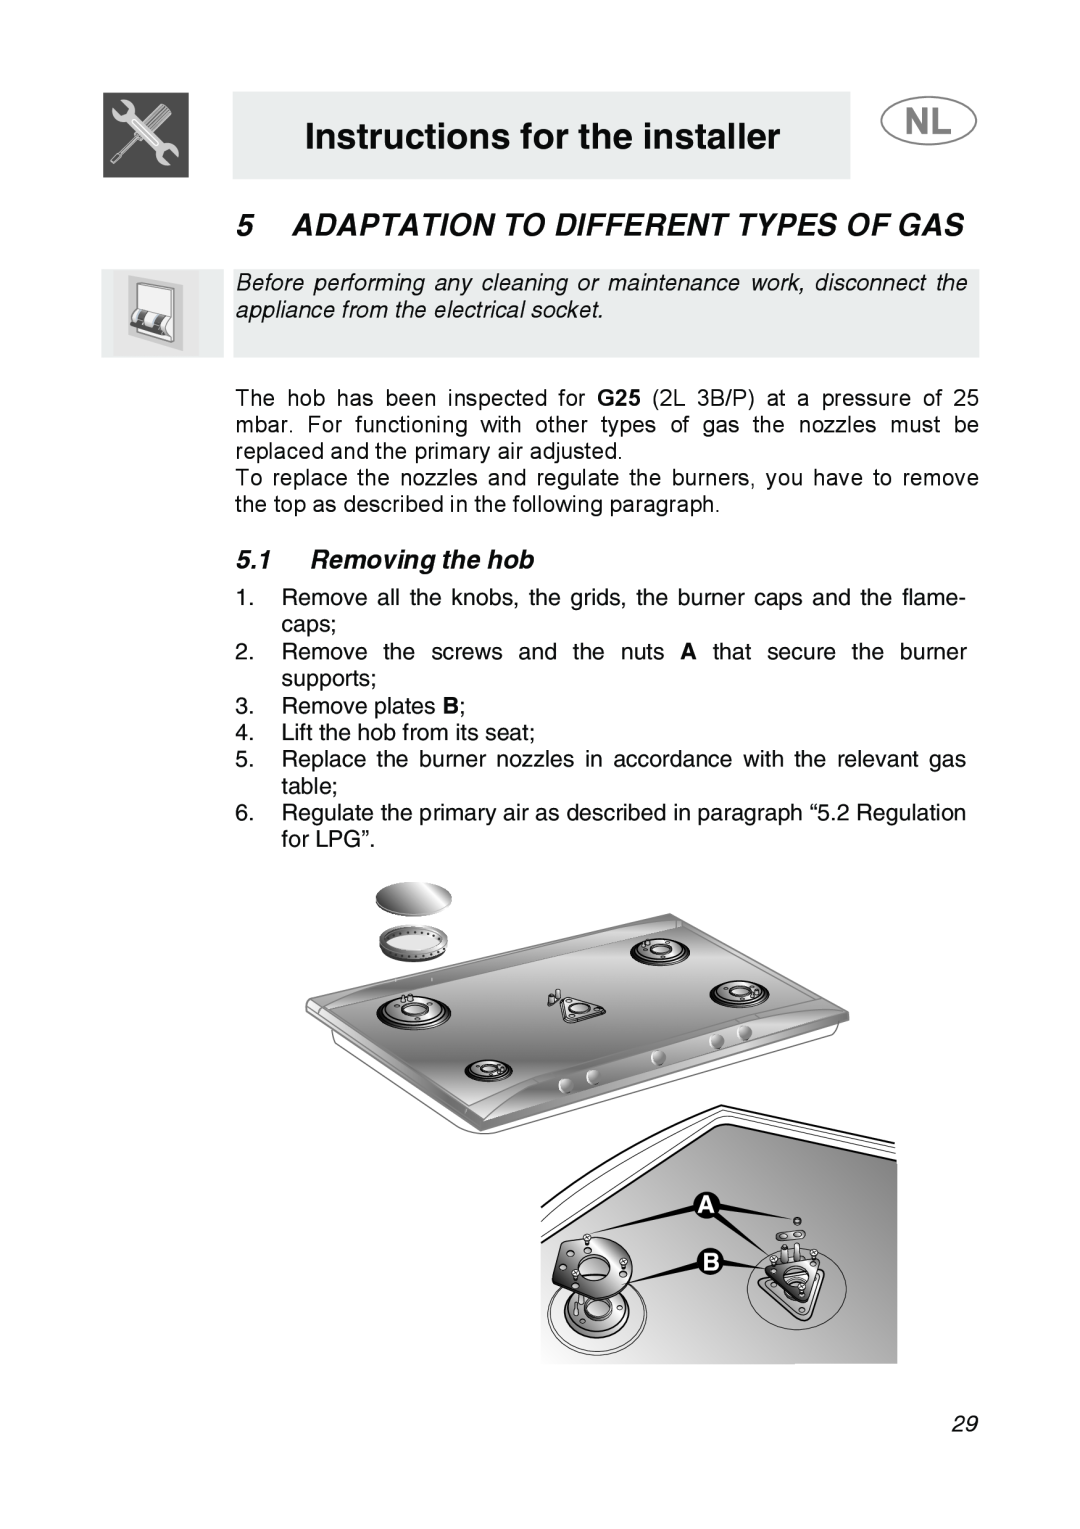 Smeg GKC755, GKCO755 manual Adaptation To Different Types Of Gas, 5.1Removing the hob, Instructions for the installer 